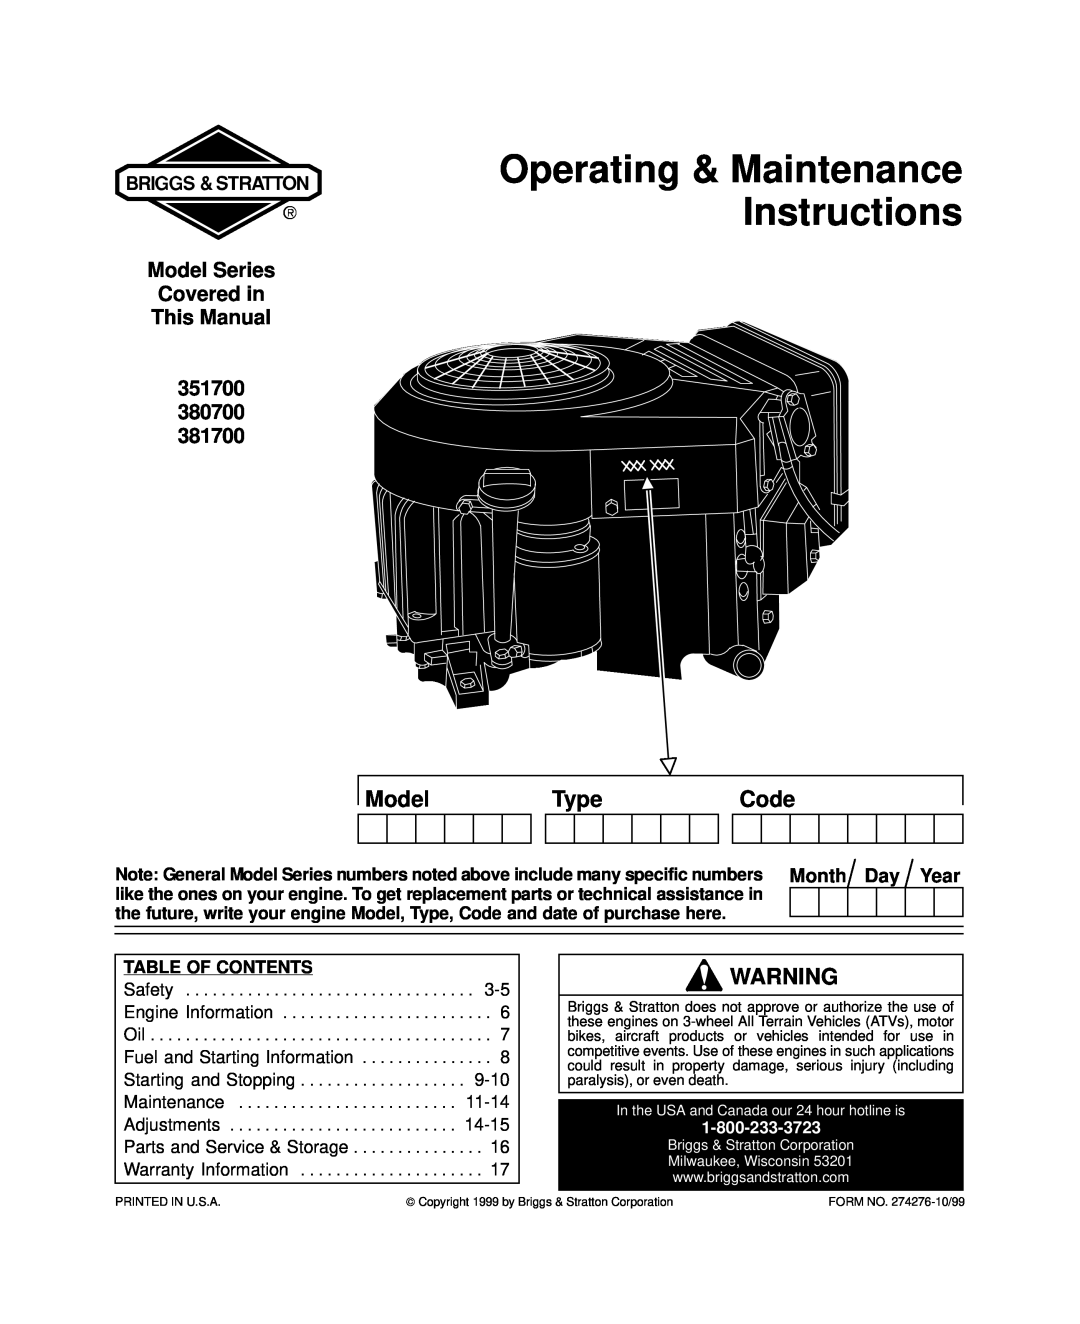 Briggs & Stratton 351700, 380700, 381700 warranty Model, Type, Code, Month Day Year, Table Of Contents 